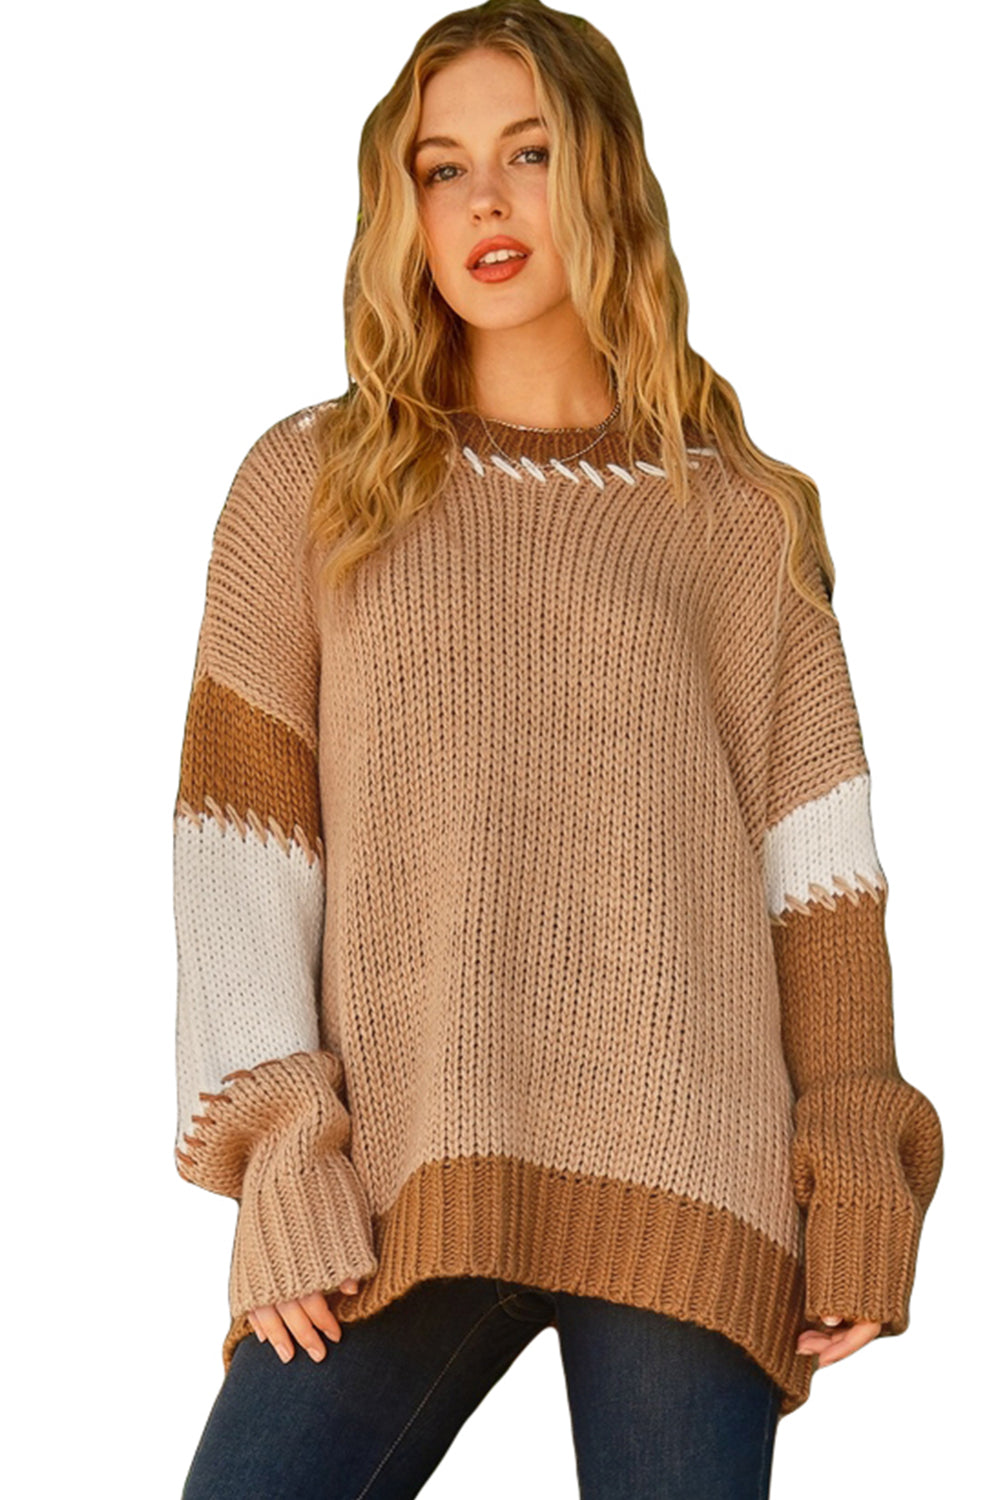 Light French Beige Color Block Contrast Stitch Oversized Sweater